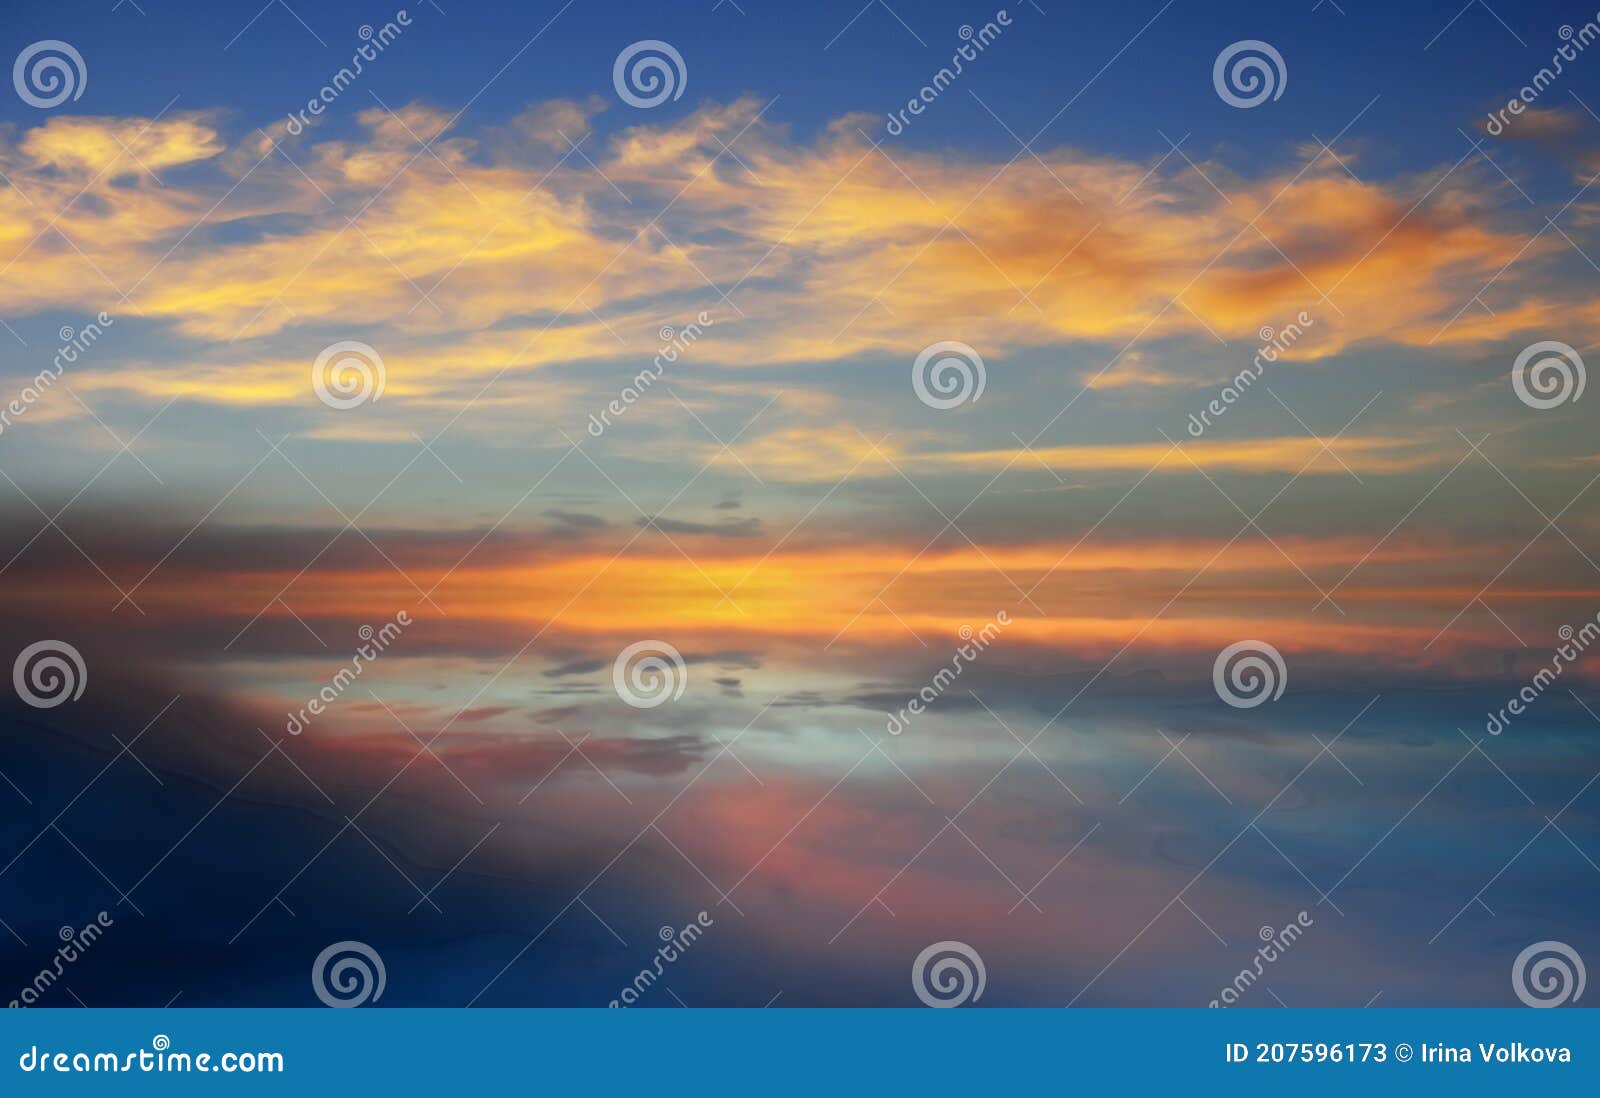 Gold Sunset Pink Blue Night Colorful Sky White Fluffy Clouds Sea Water